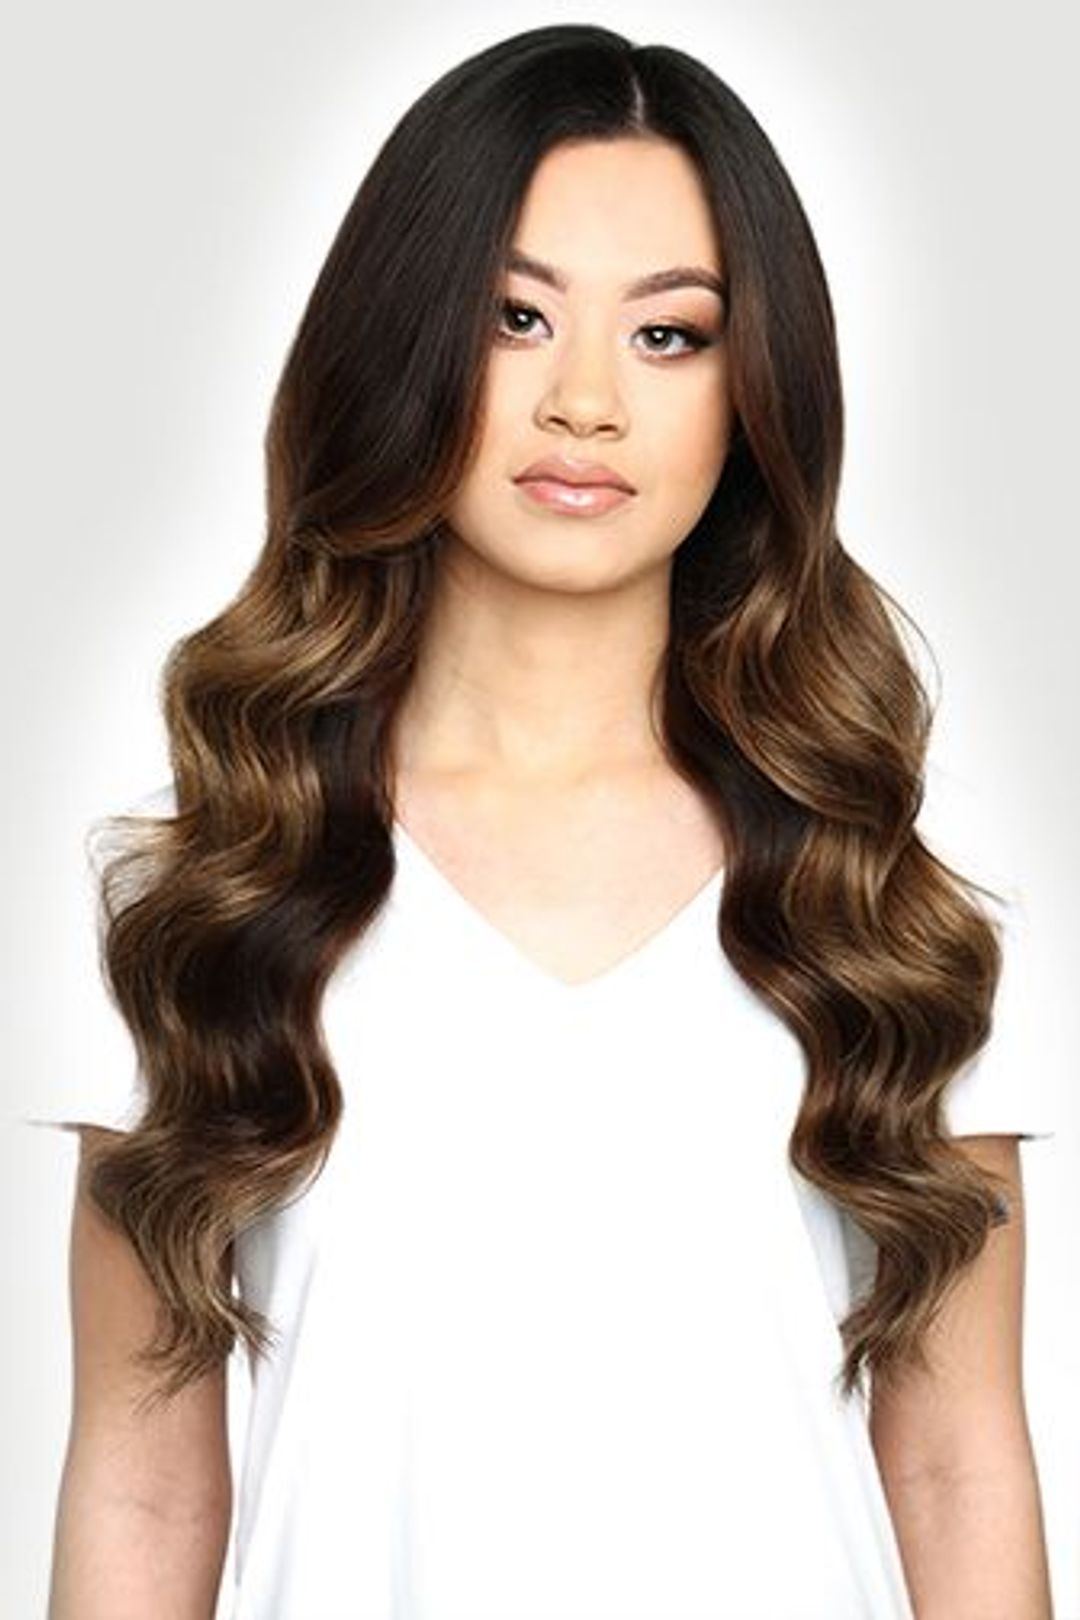 Beauty Works Deluxe Clip-In Hair Extensions - Caramel,20"